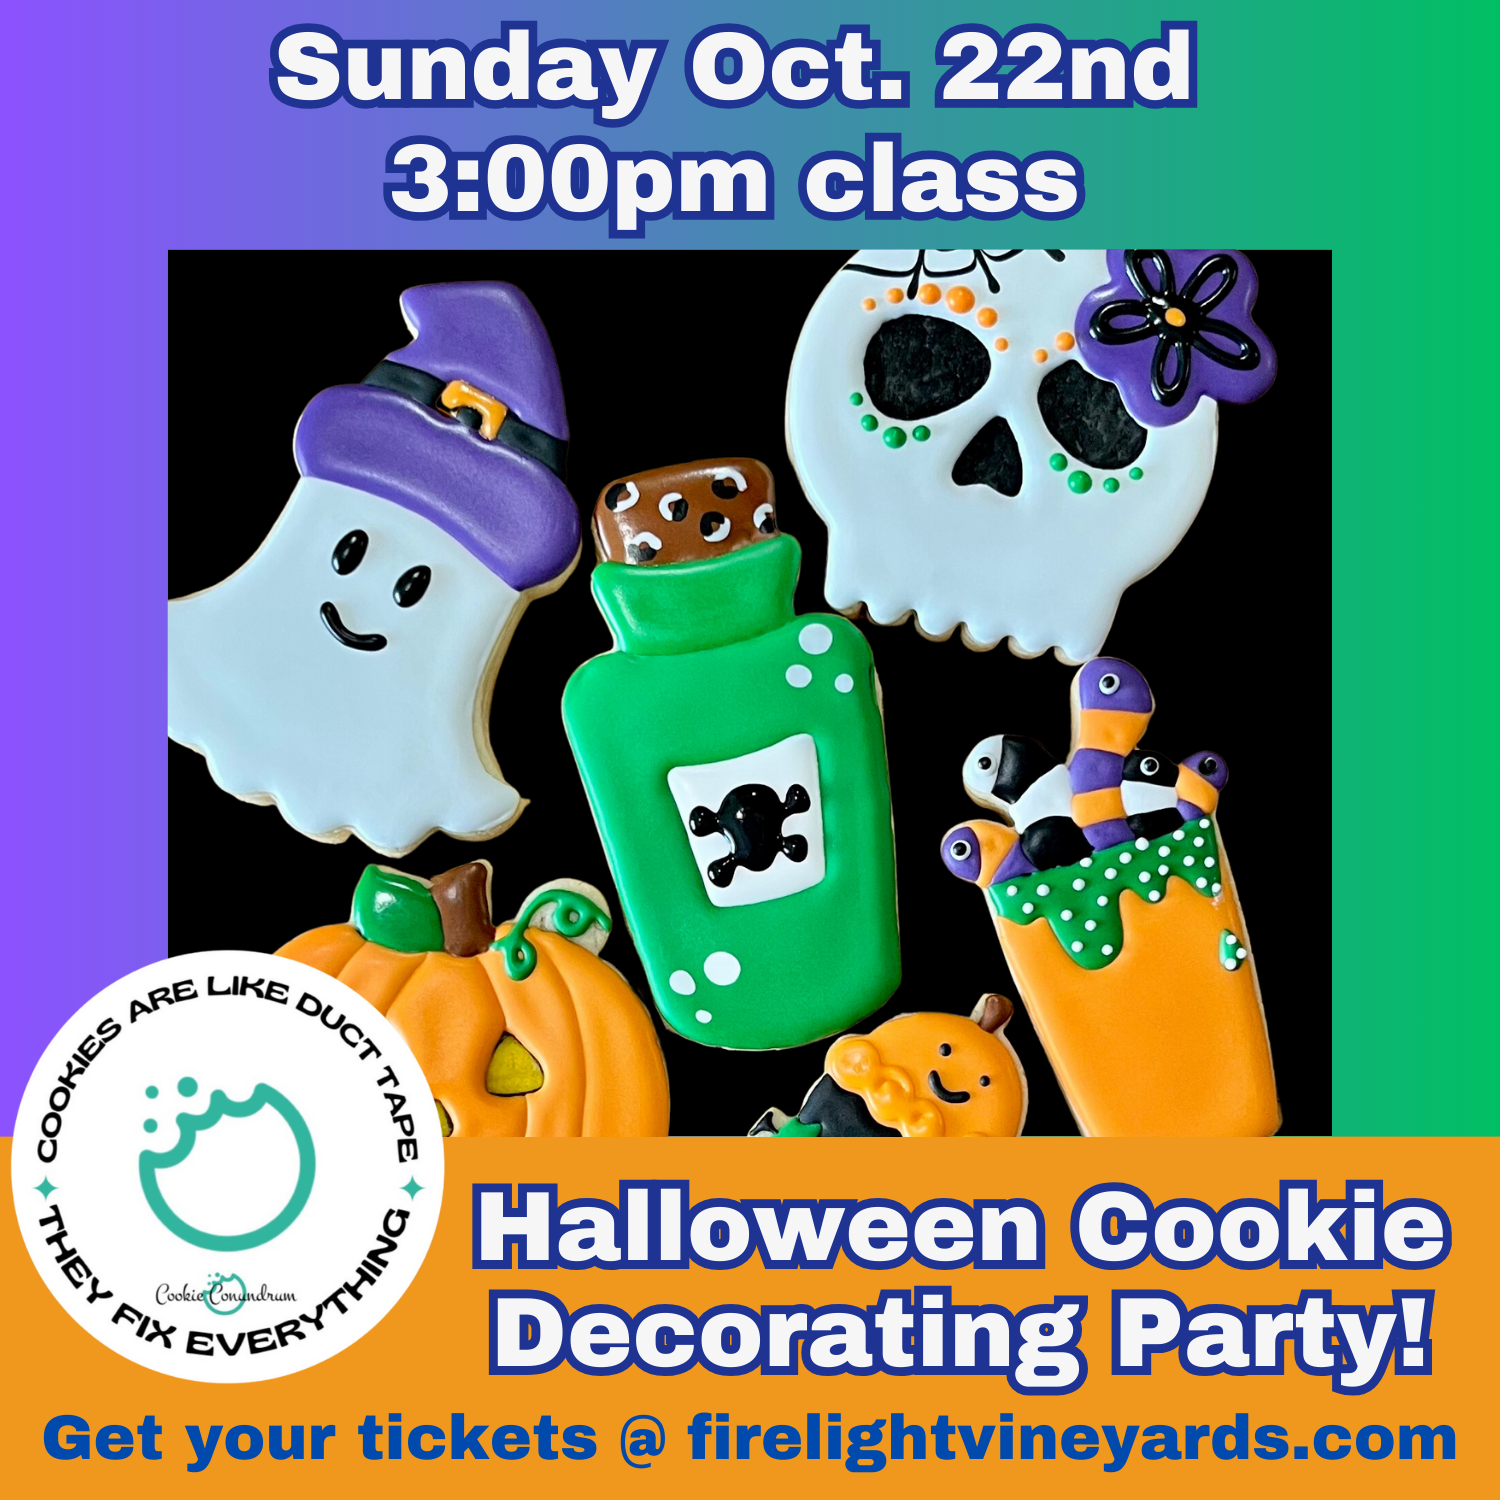 Product Image for Cookie Decorating Party 3:00pm Start